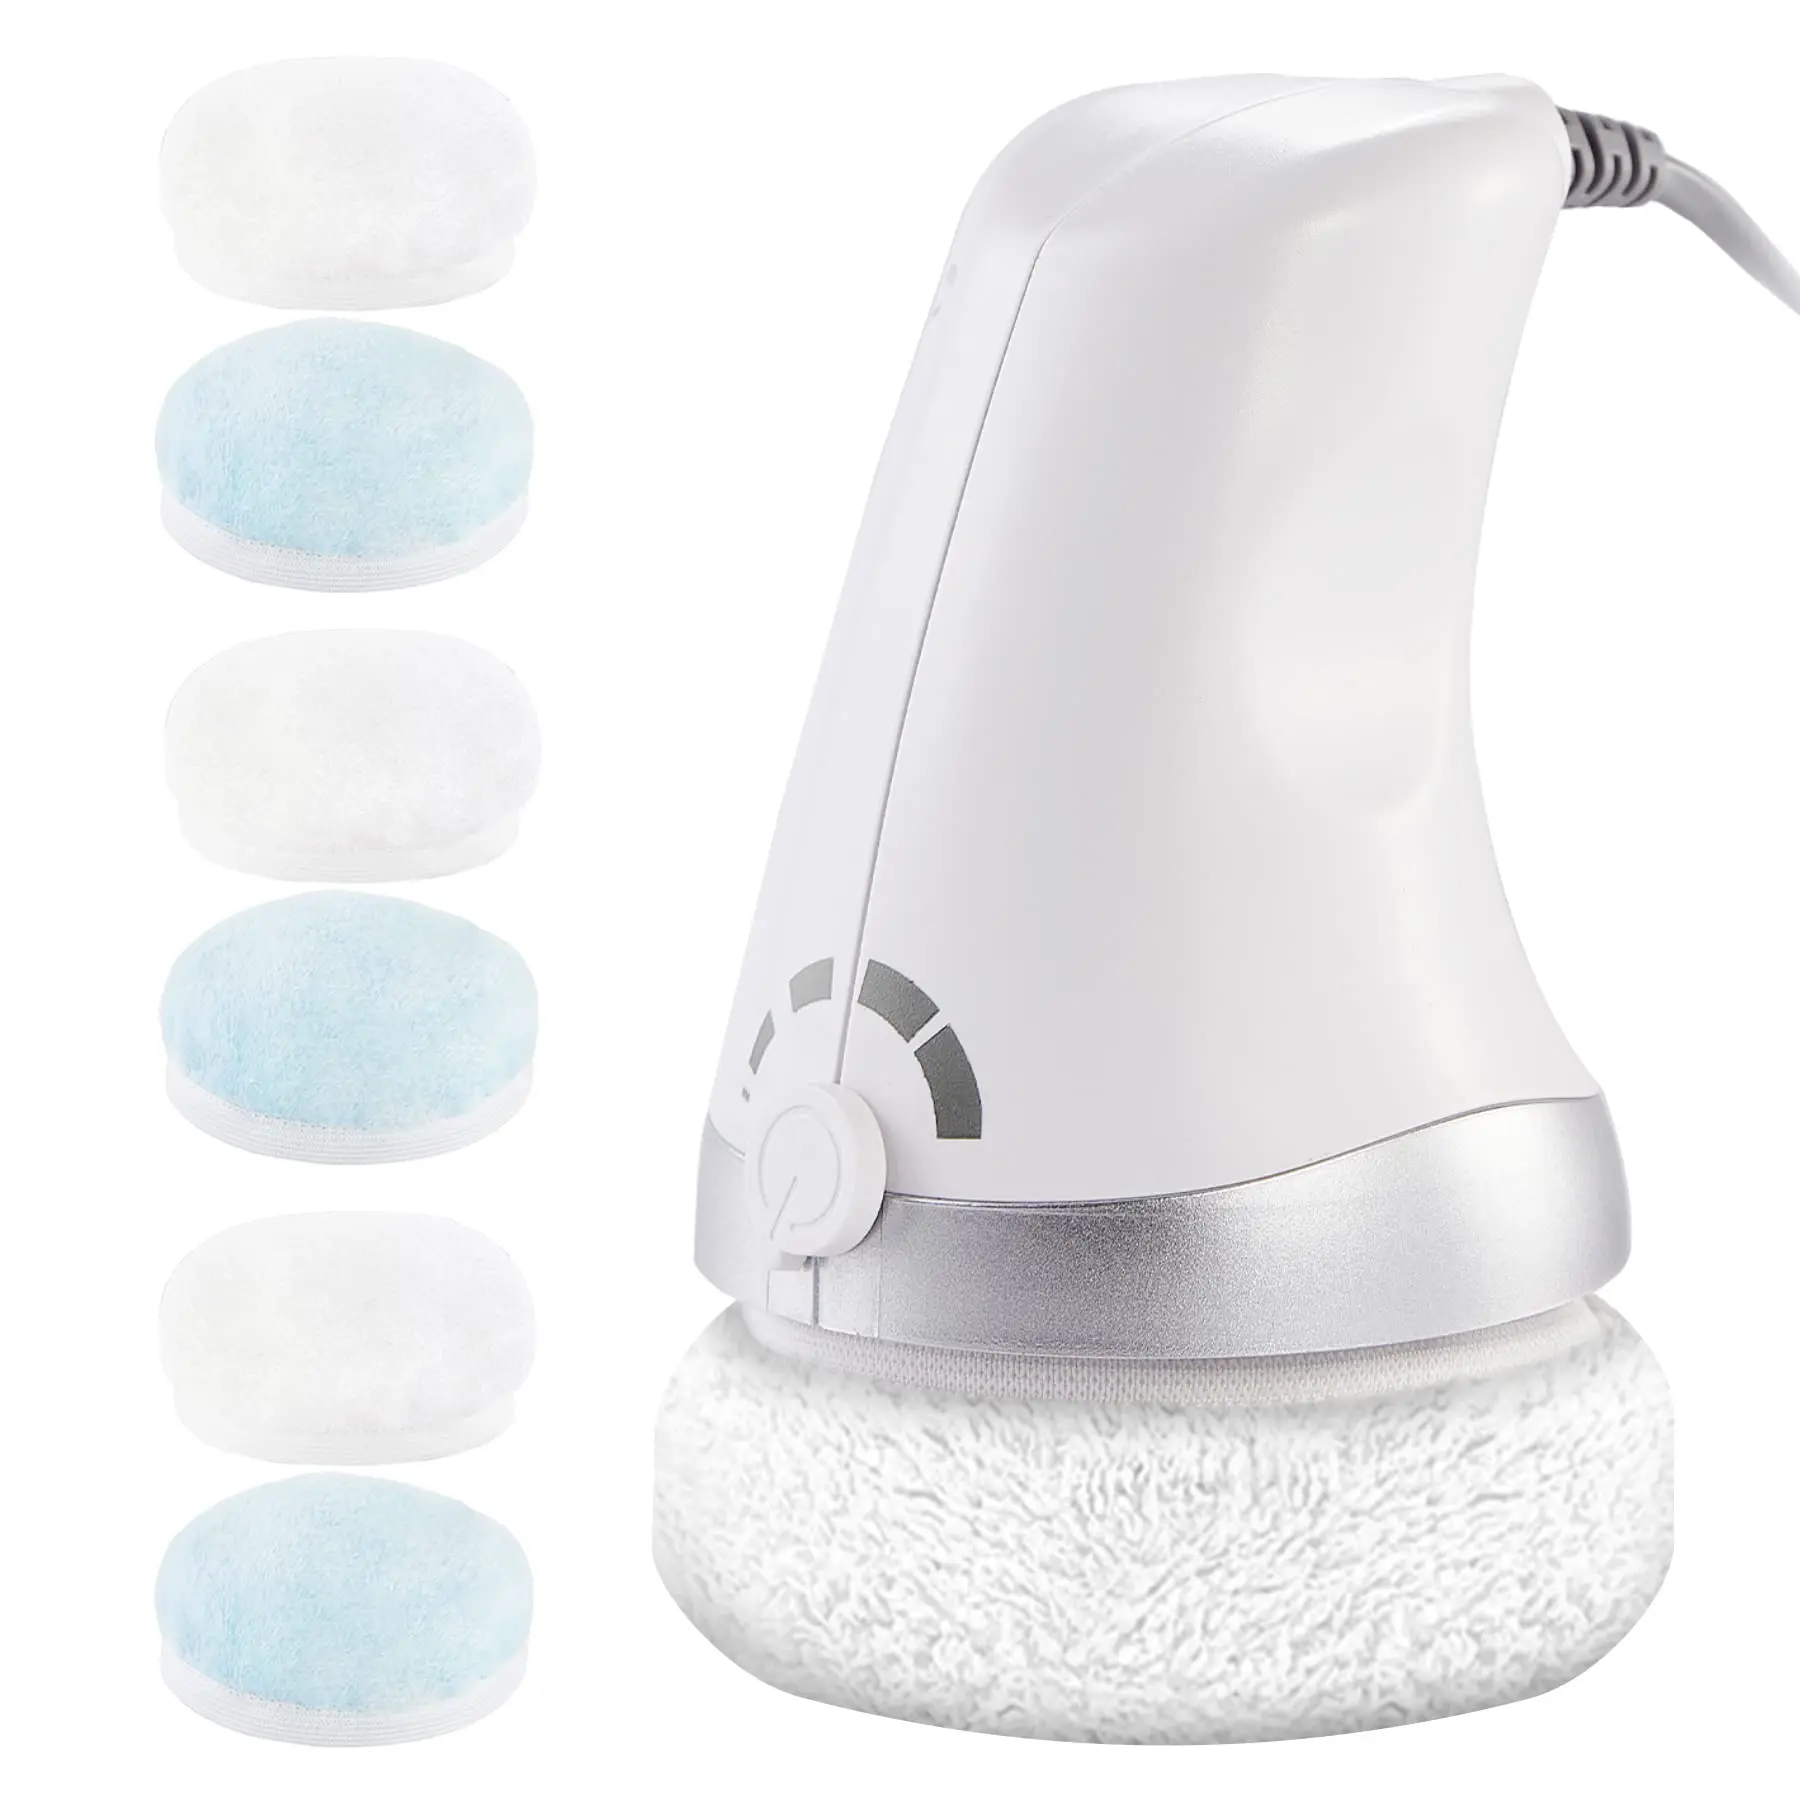 

Electric Deep Tissue fat and Cellulite Remover Handheld Body Massager Sculpting Machine with Washable Pads for Belly Waist Butt